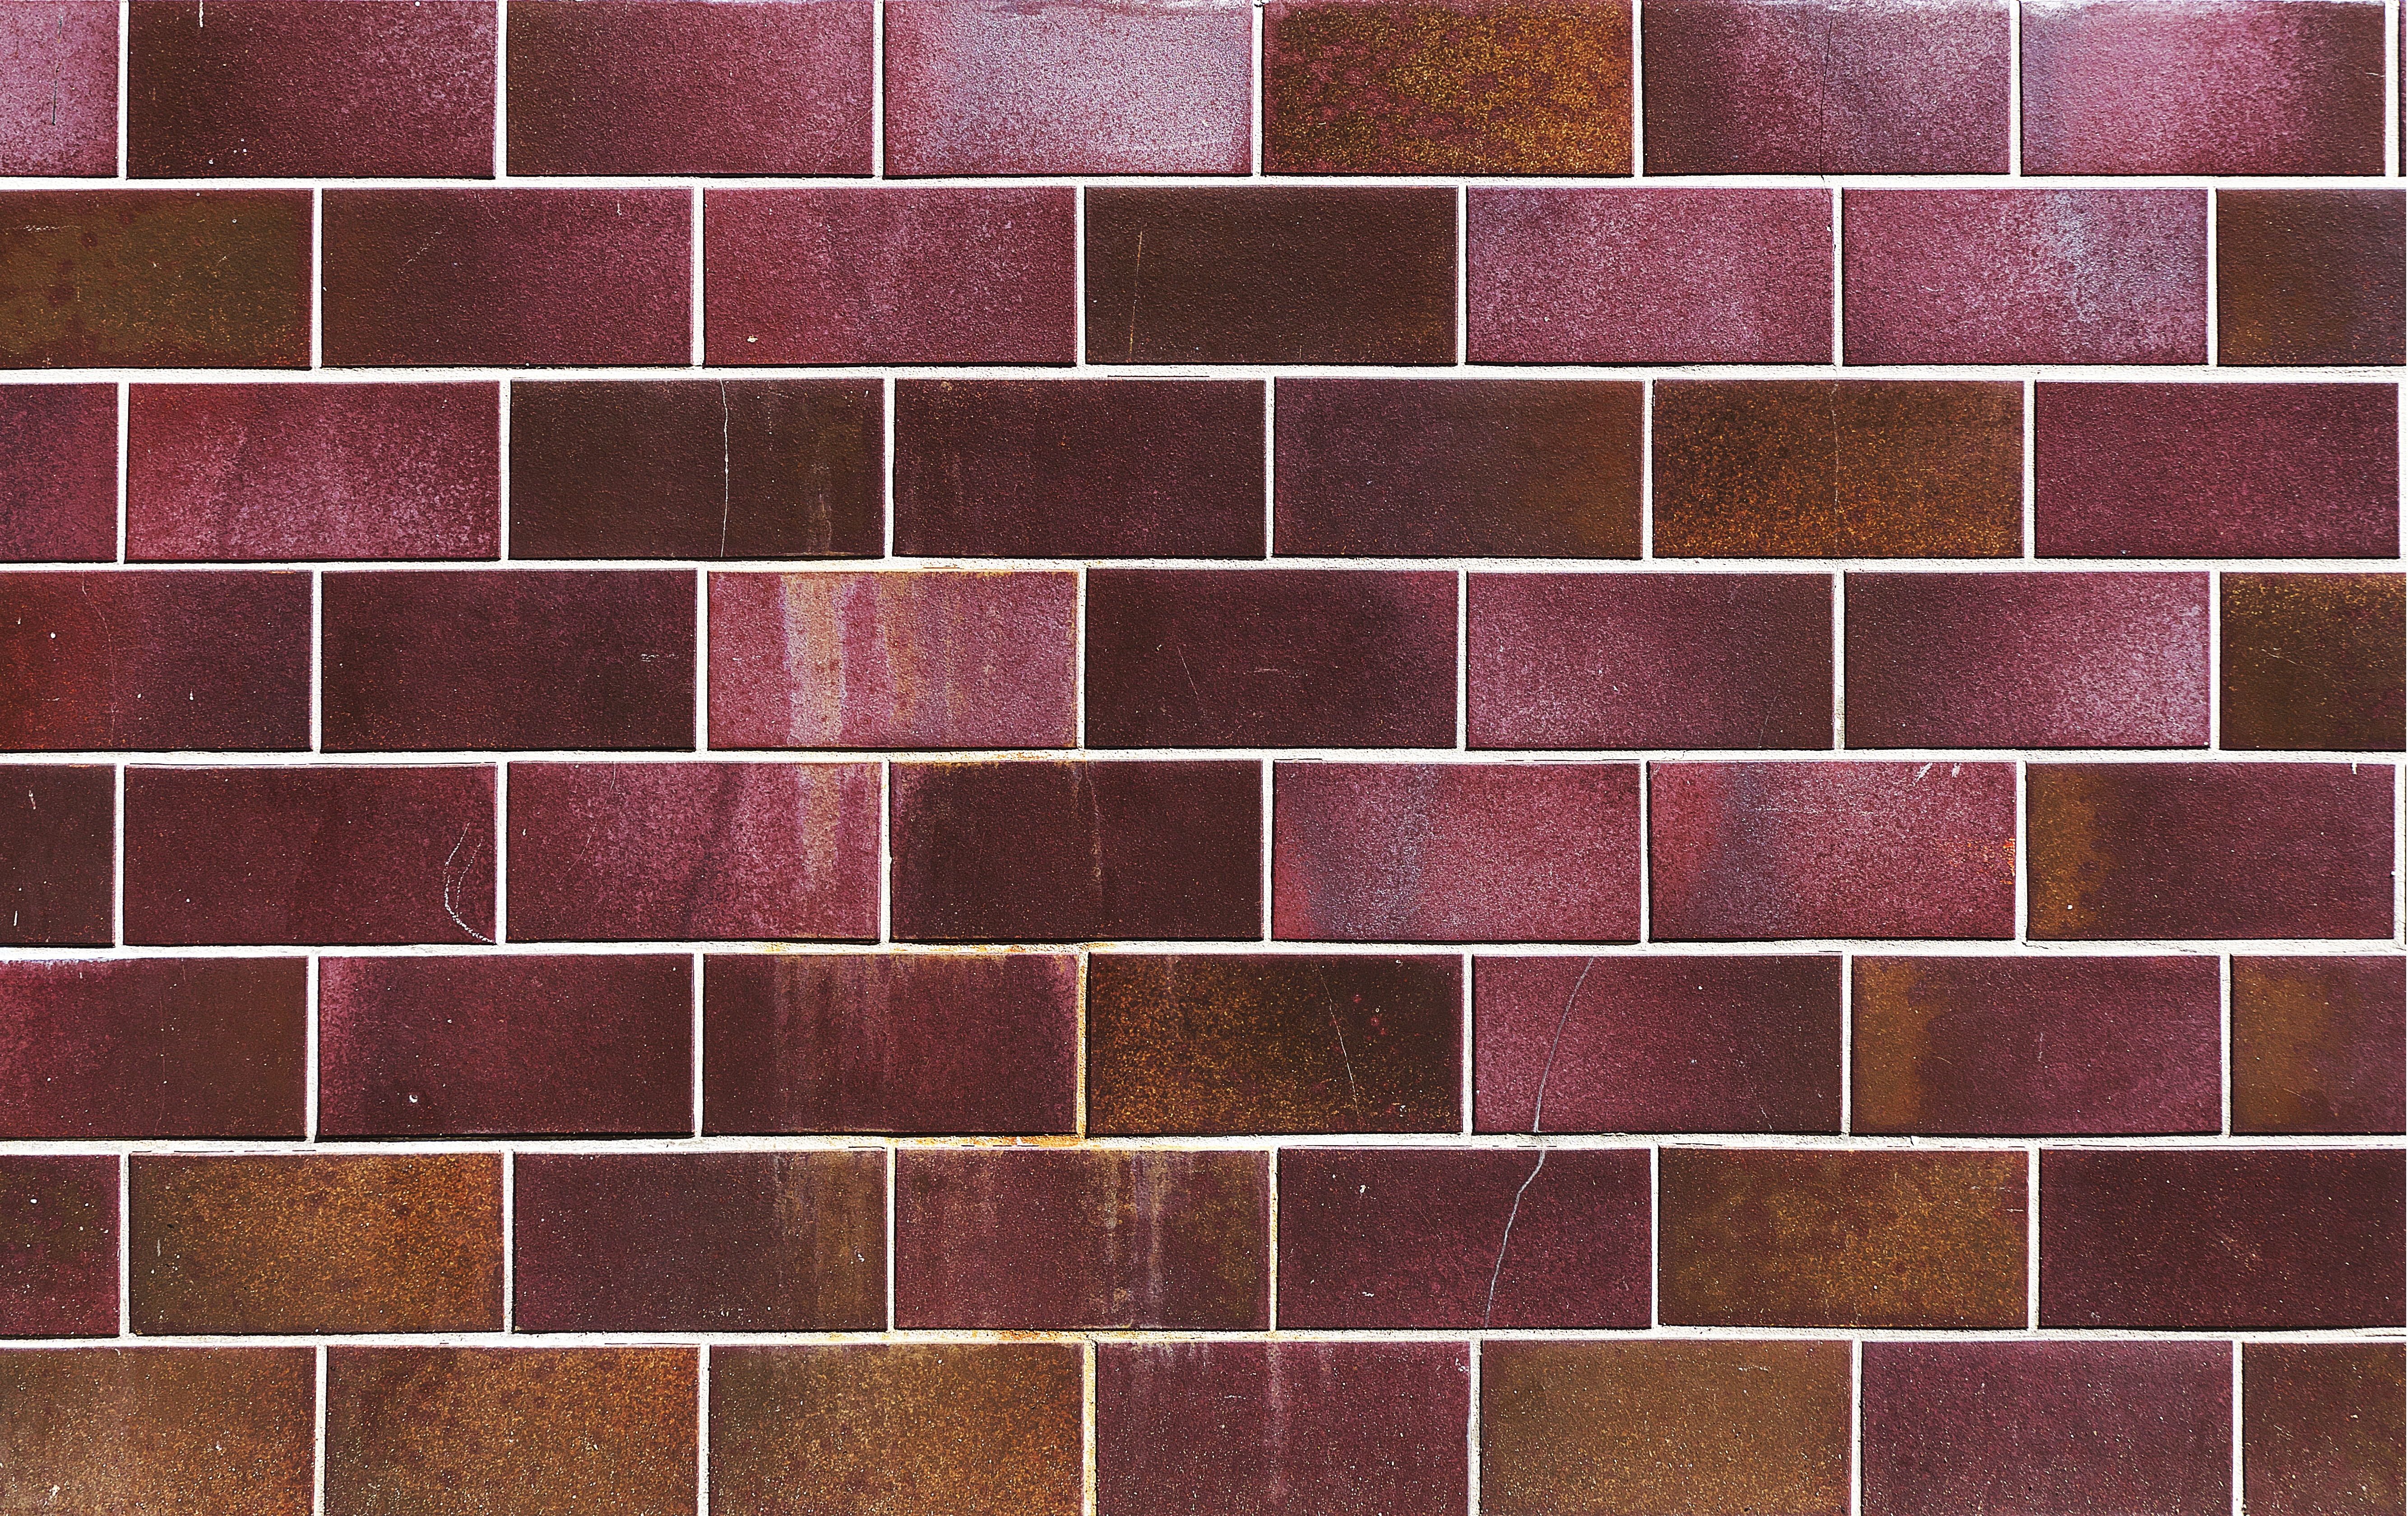 gray and brown brick wall illustration, facade, clinker, tile